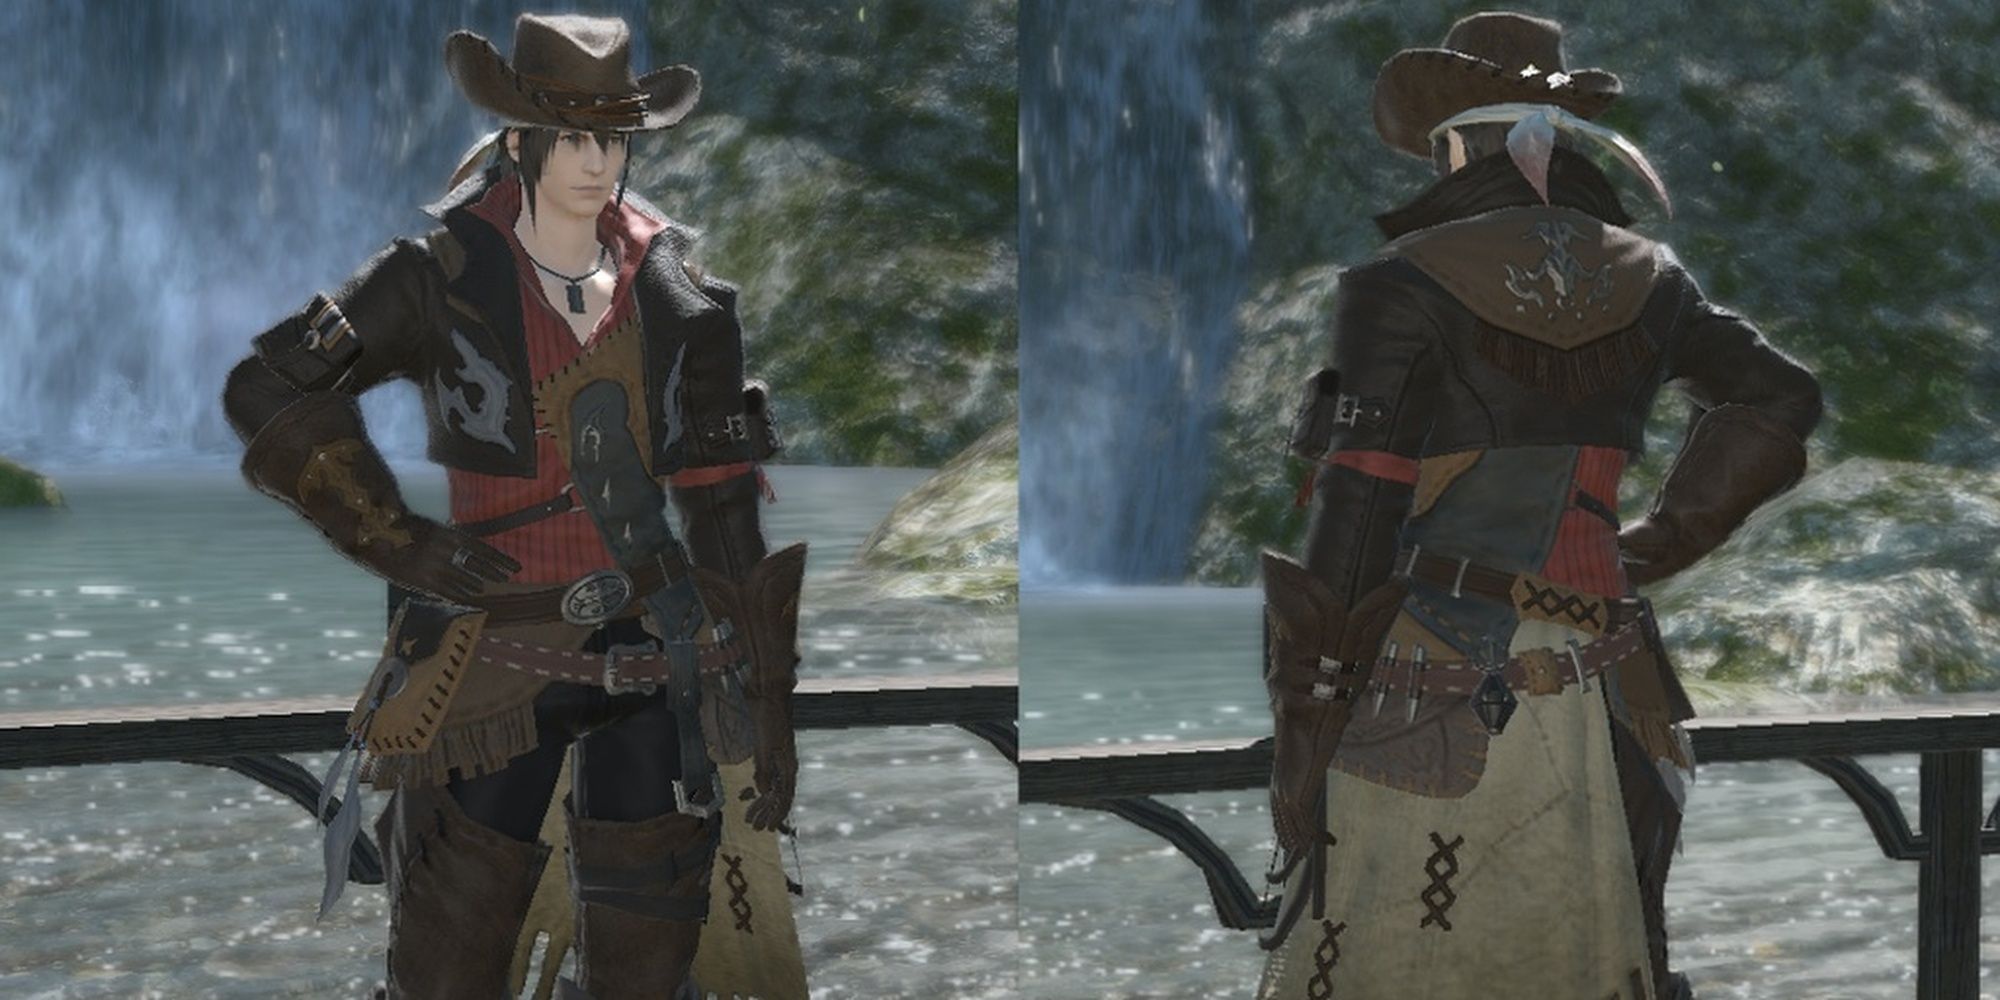 Final Fantasy 14 Split Image with Hyur in Wrangler Armor, Posed in Front of a Waterfall